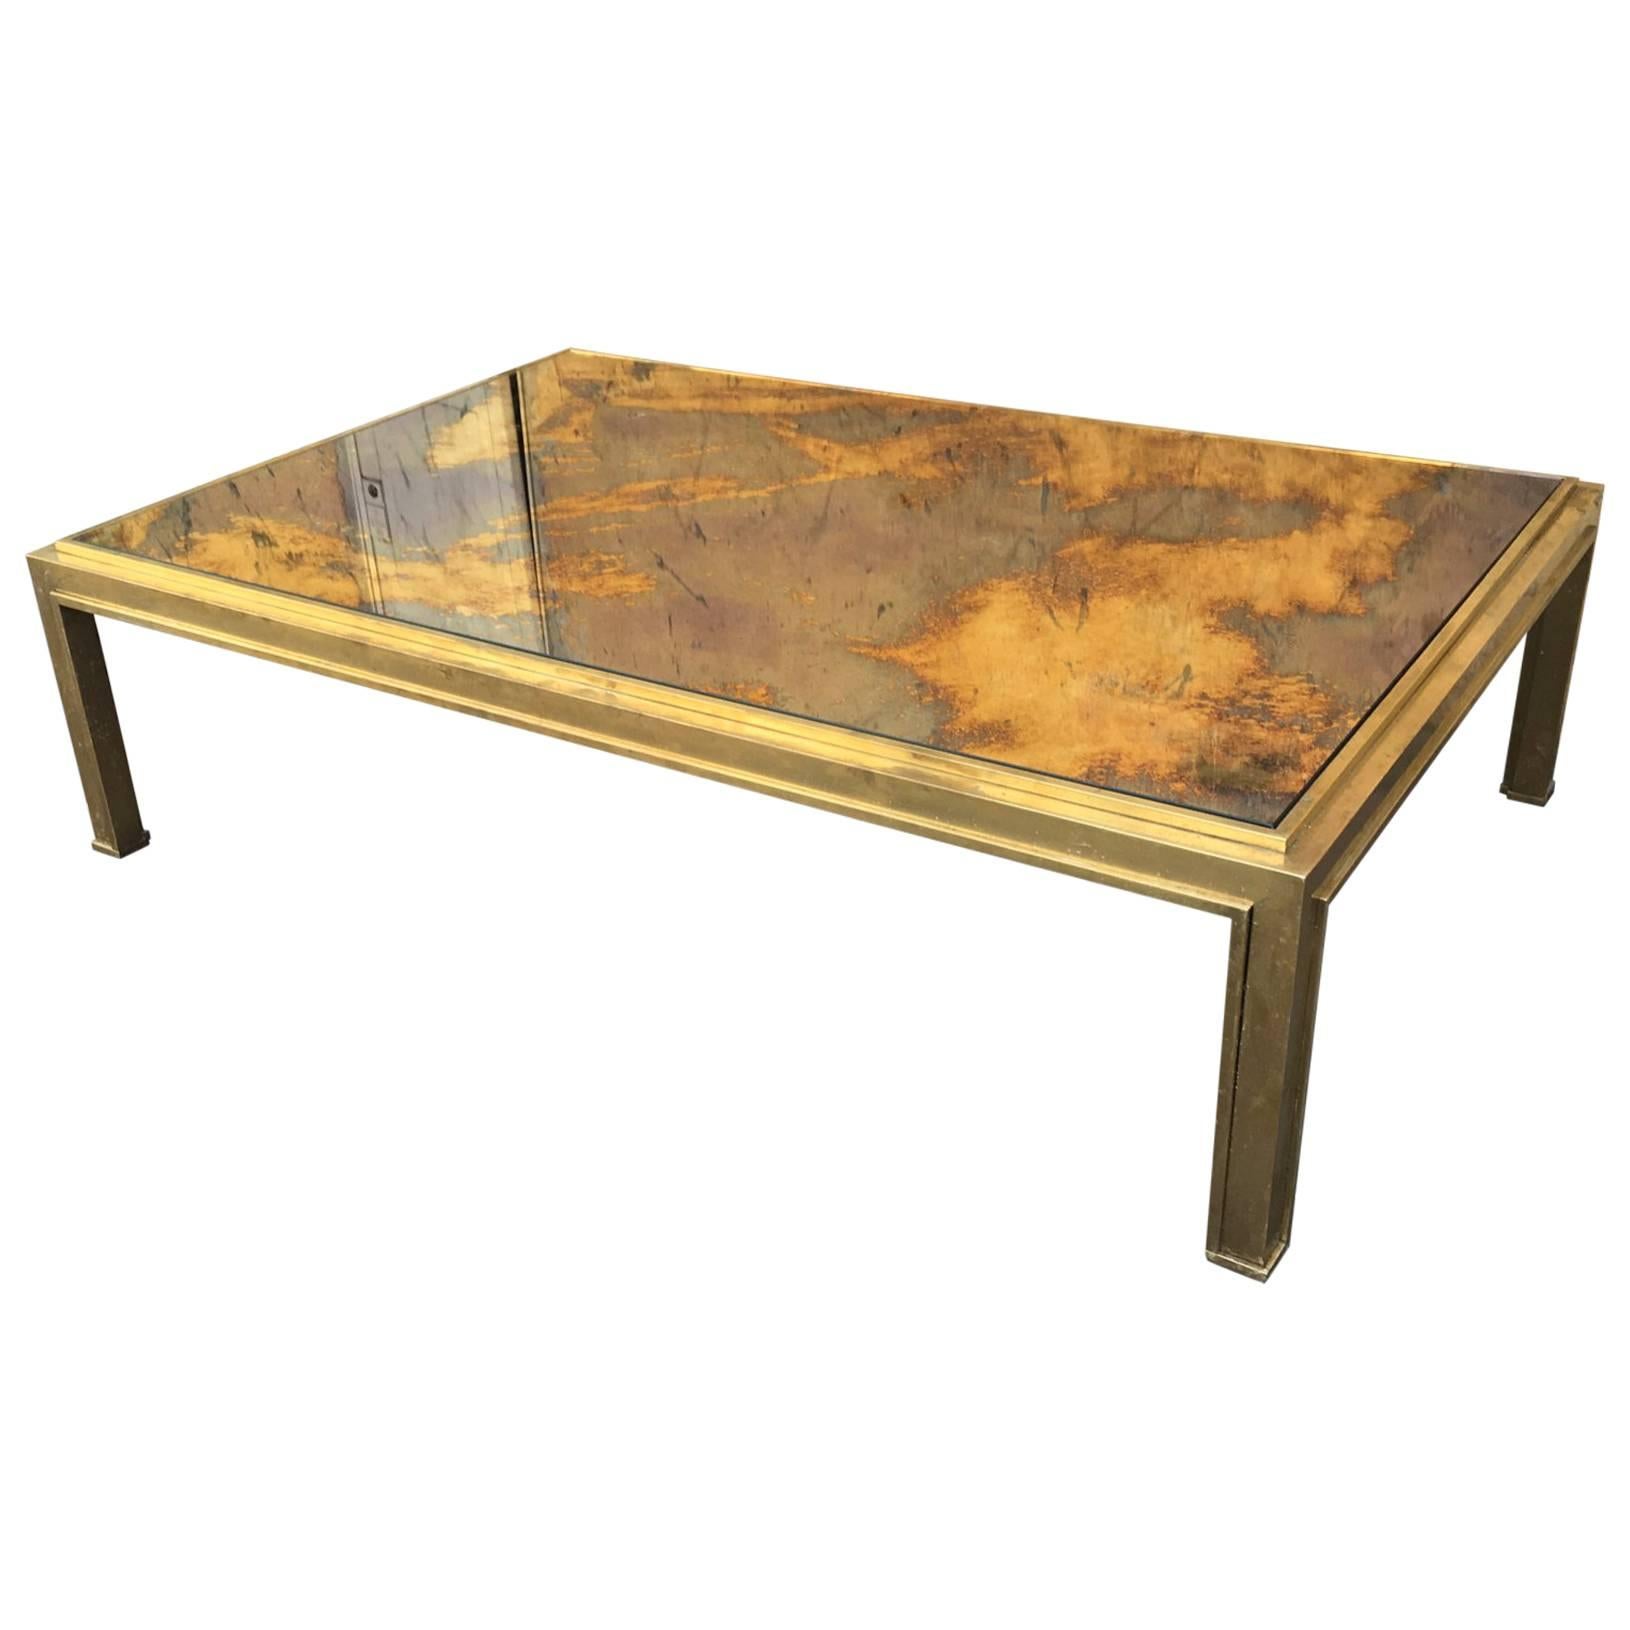 Jacques Adnet Sturdy Gold Bronze Big Coffee Table with a Gold Leaf Mirrored Top For Sale